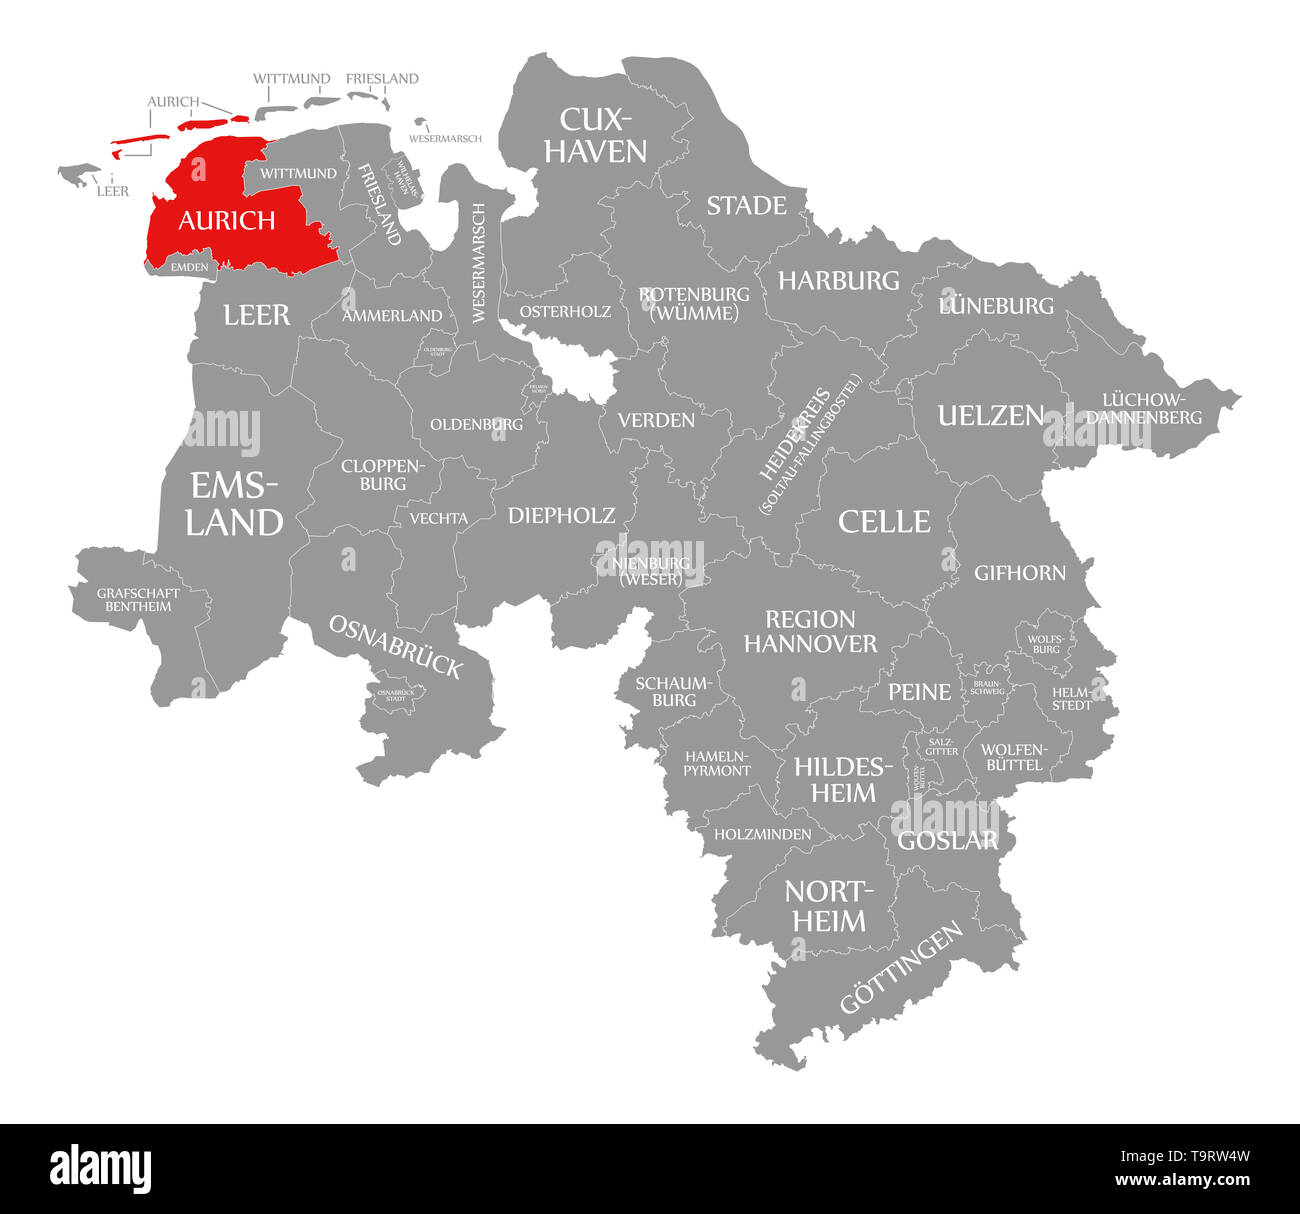 Aurich county red highlighted in map of Lower Saxony Germany Stock Photo